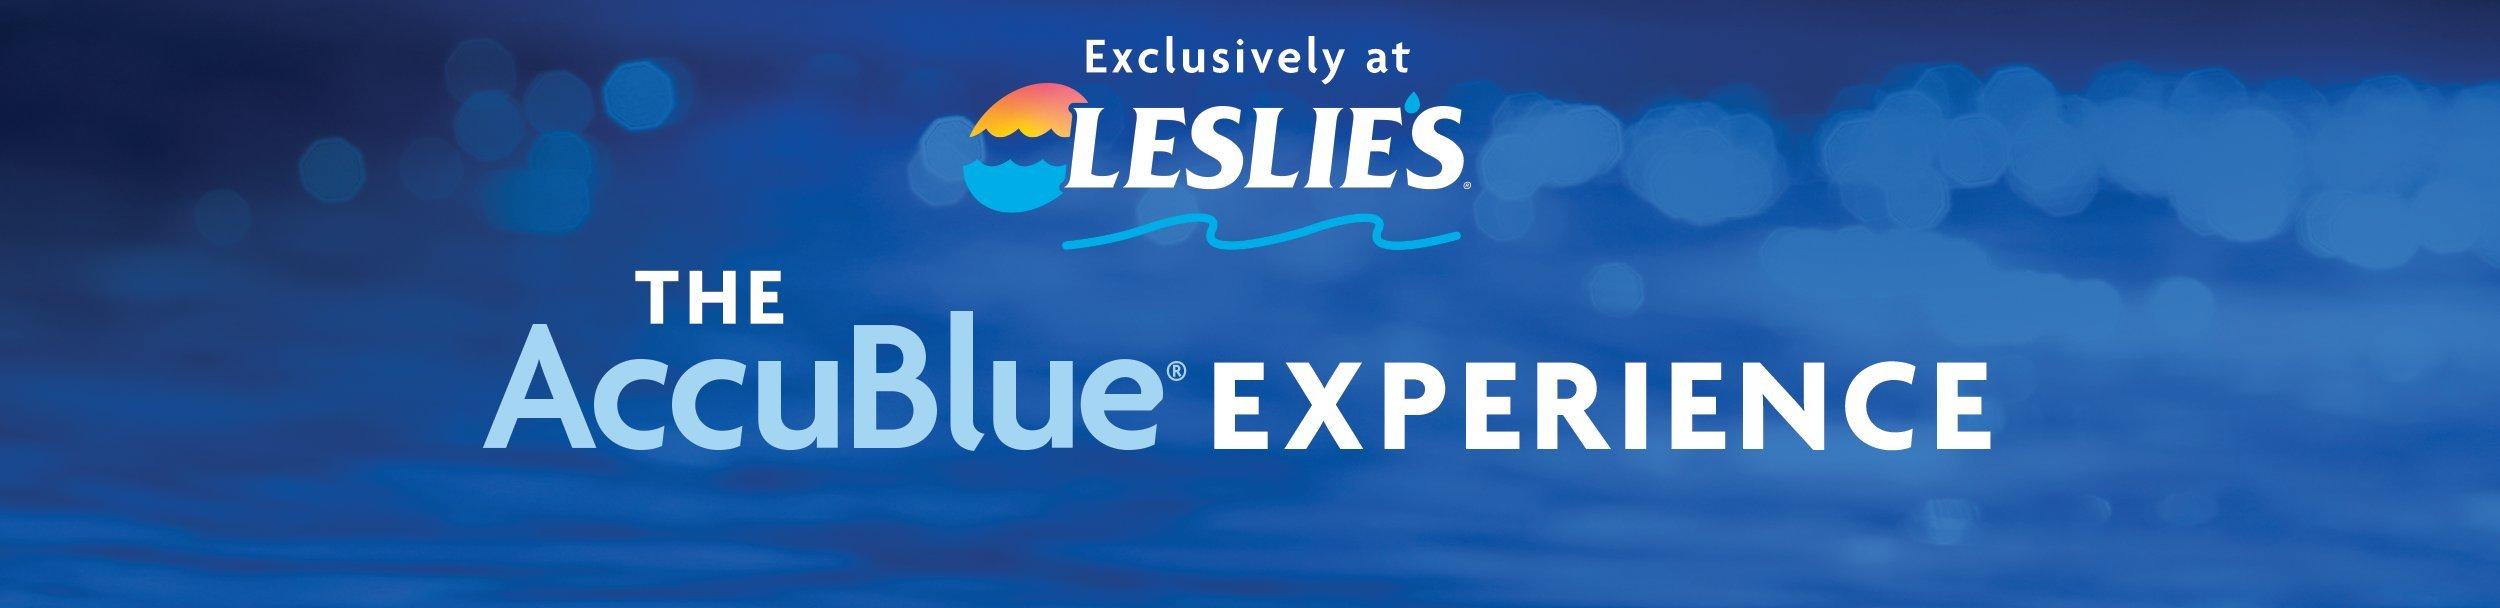 The AccuBlue Experience at Leslie's